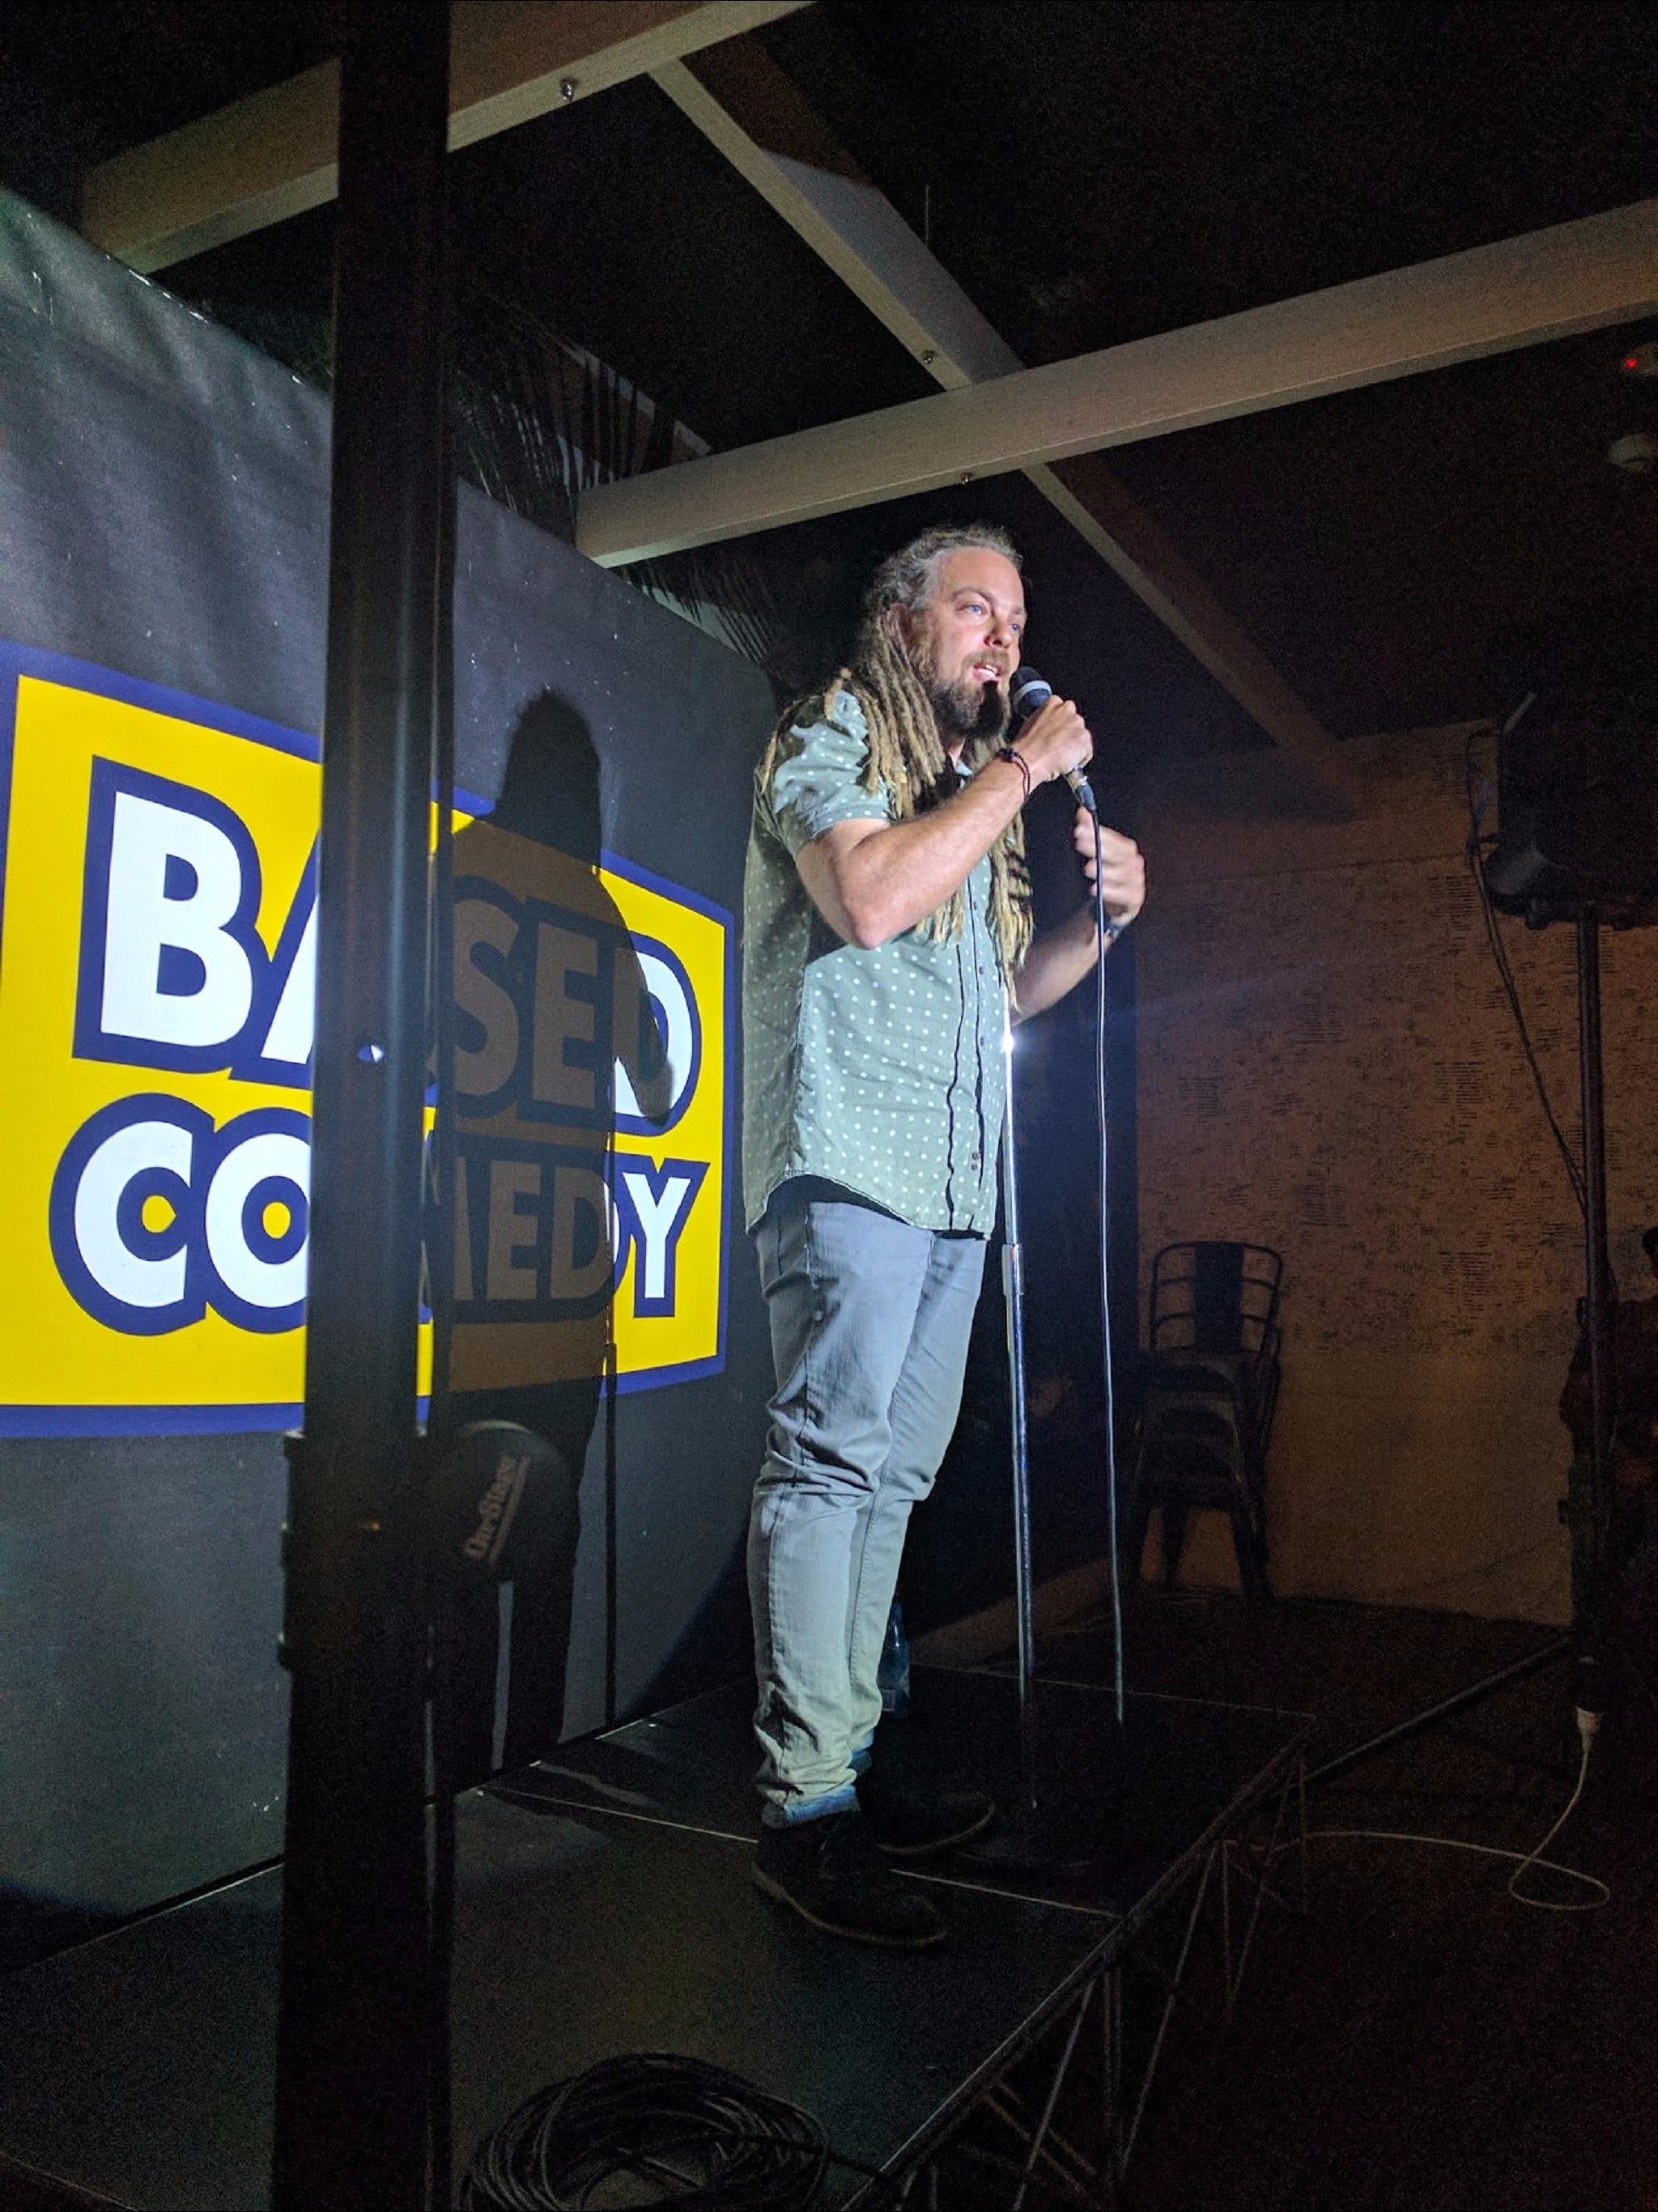 Based Comedy at The Palm Beach Hotel - Kingaroy Accommodation